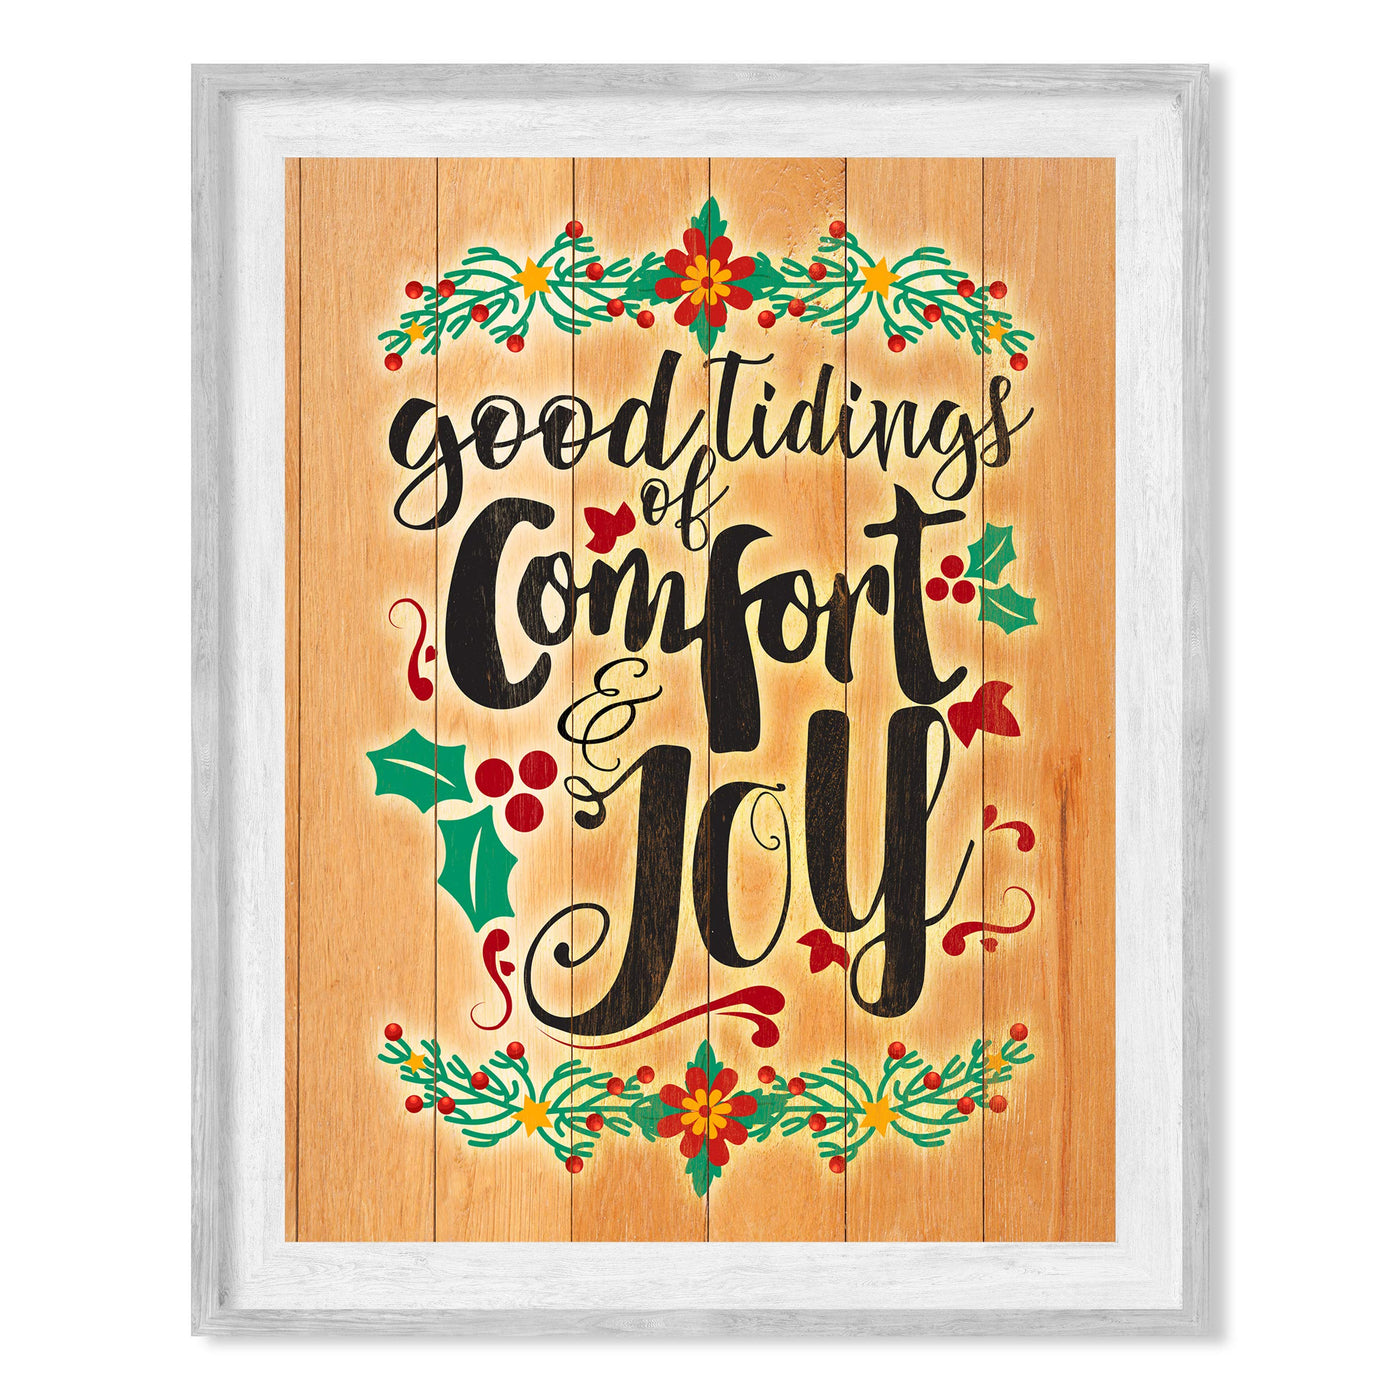 Good Tidings of Comfort and Joy Christmas Wall Sign-8x10" Christian Holiday Art on Replica Wood Design Print-Ready to Frame. Festive Home-Welcome-Kitchen-Farmhouse-Winter Decor! Printed on Paper.